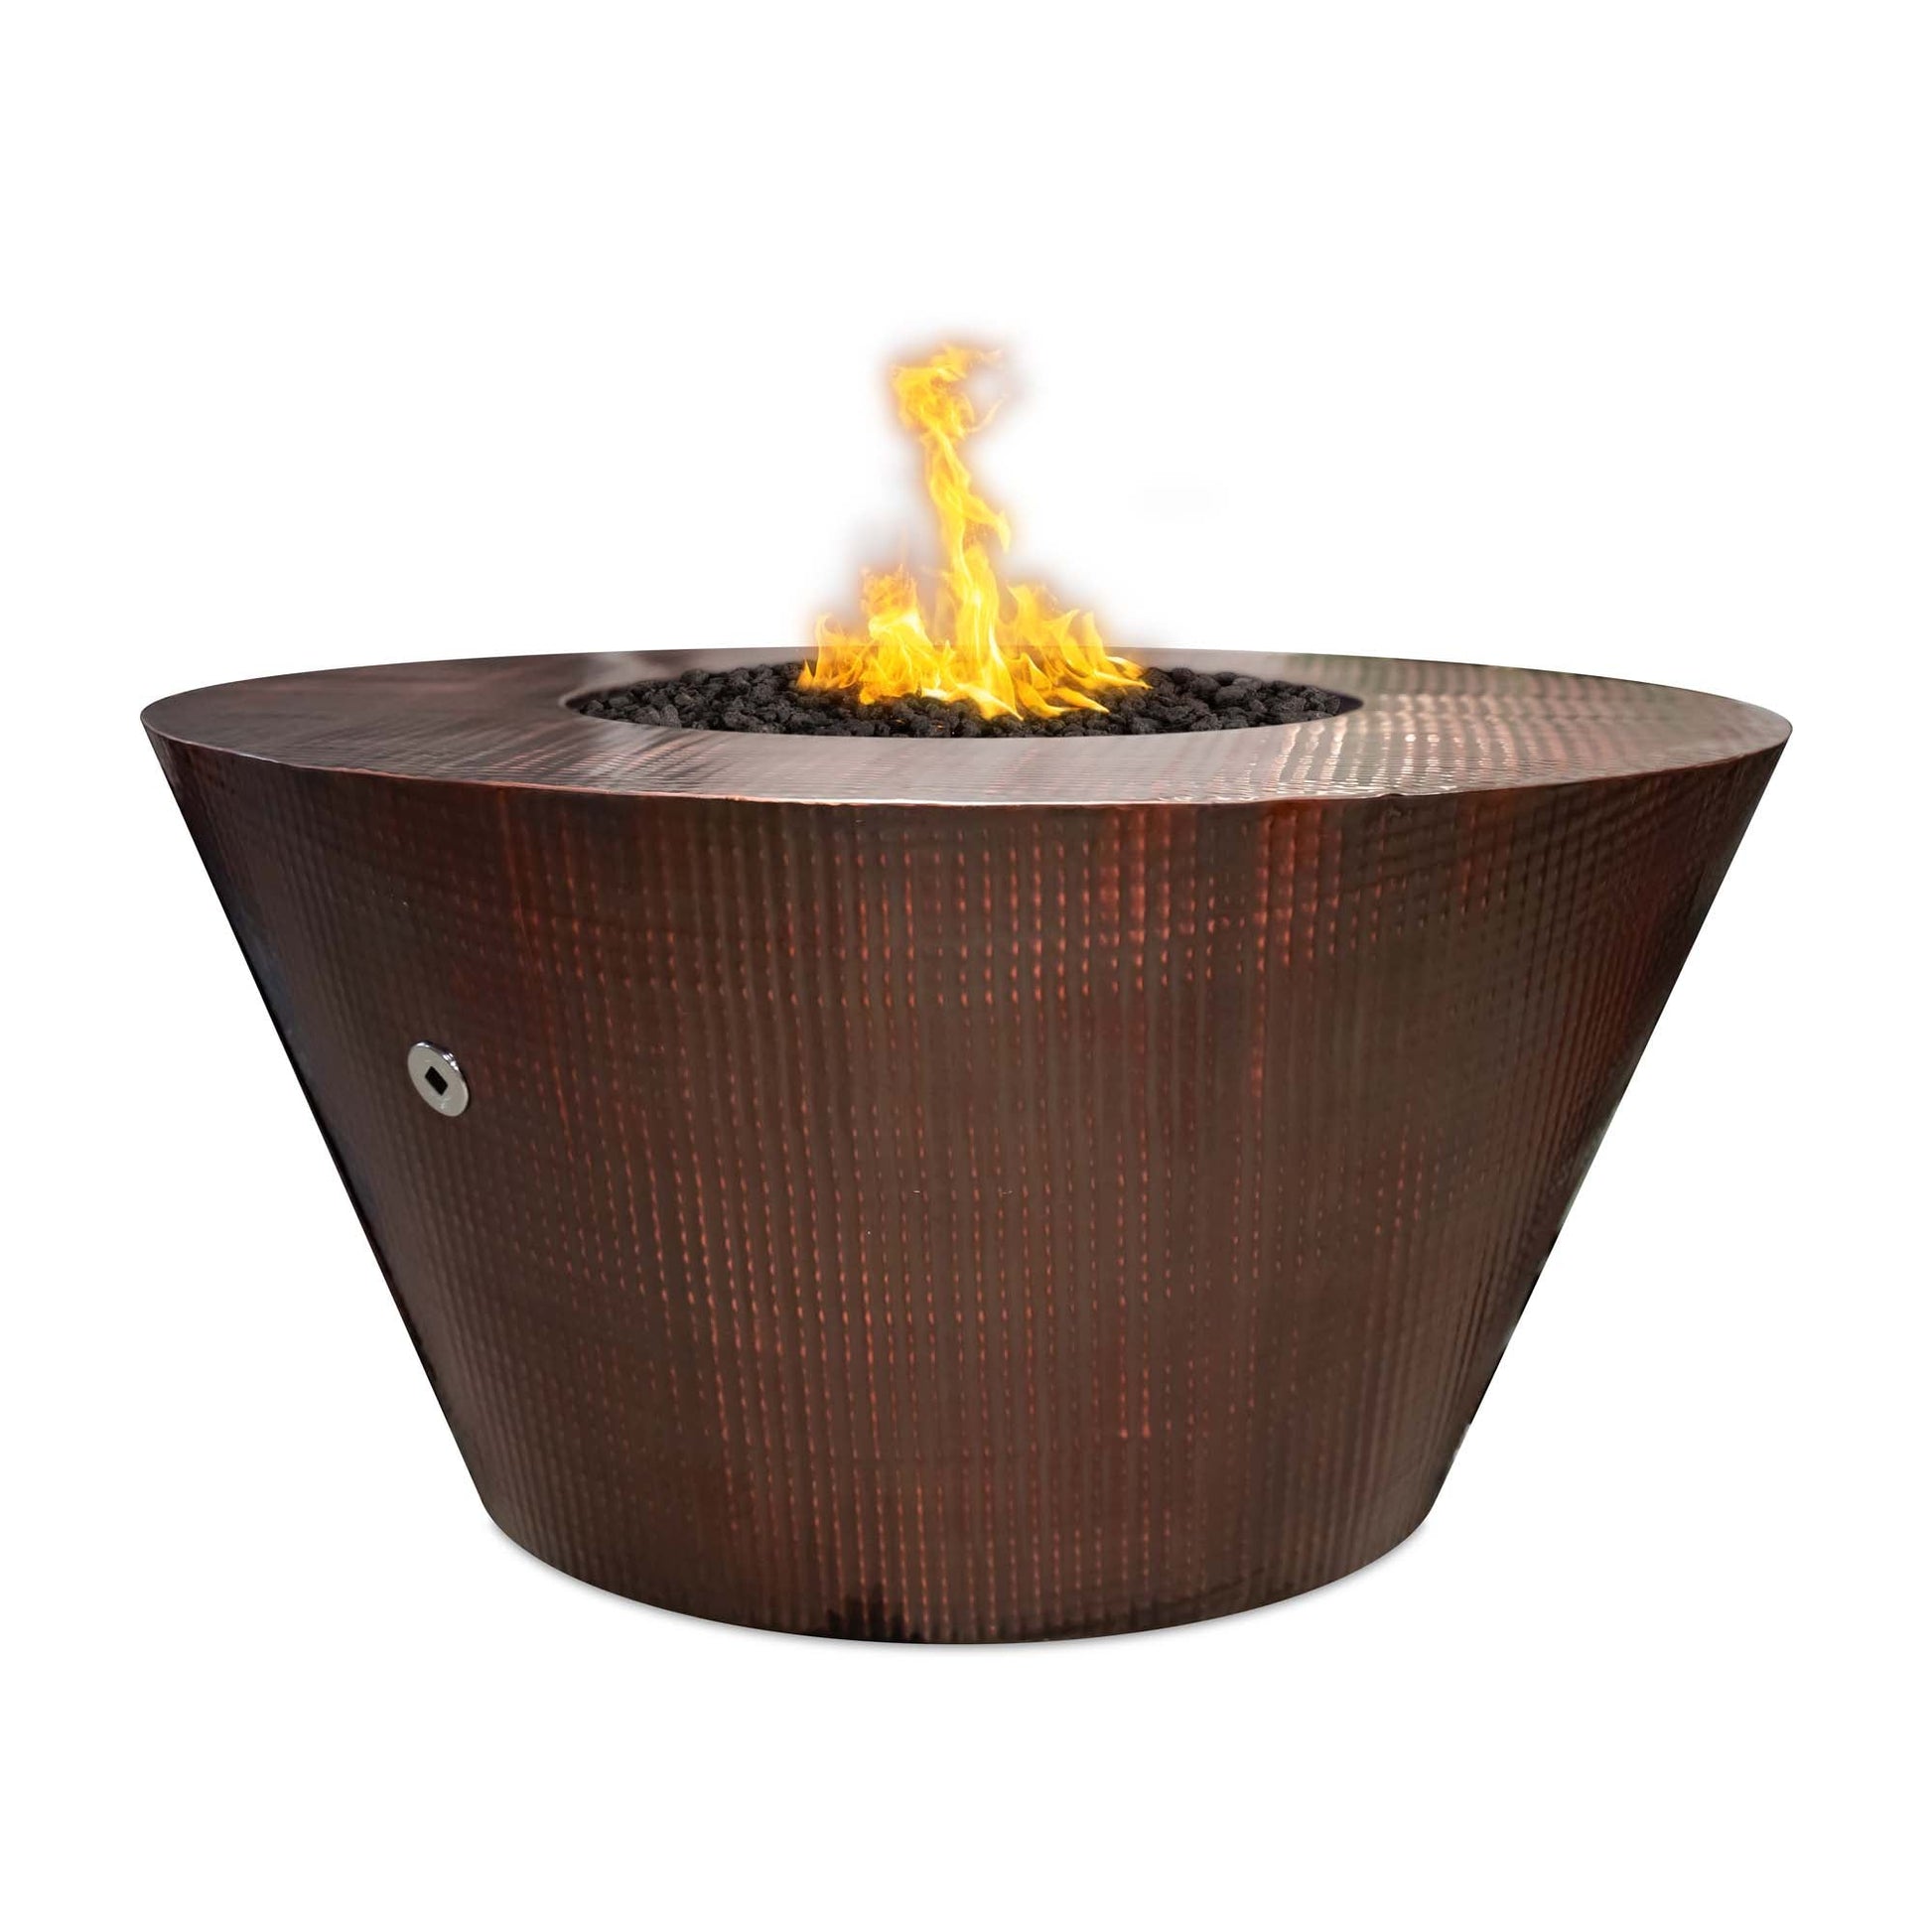 The Outdoor Plus Round Martillo 48" Stainless Steel Liquid Propane Fire Pit with Match Lit Ignition